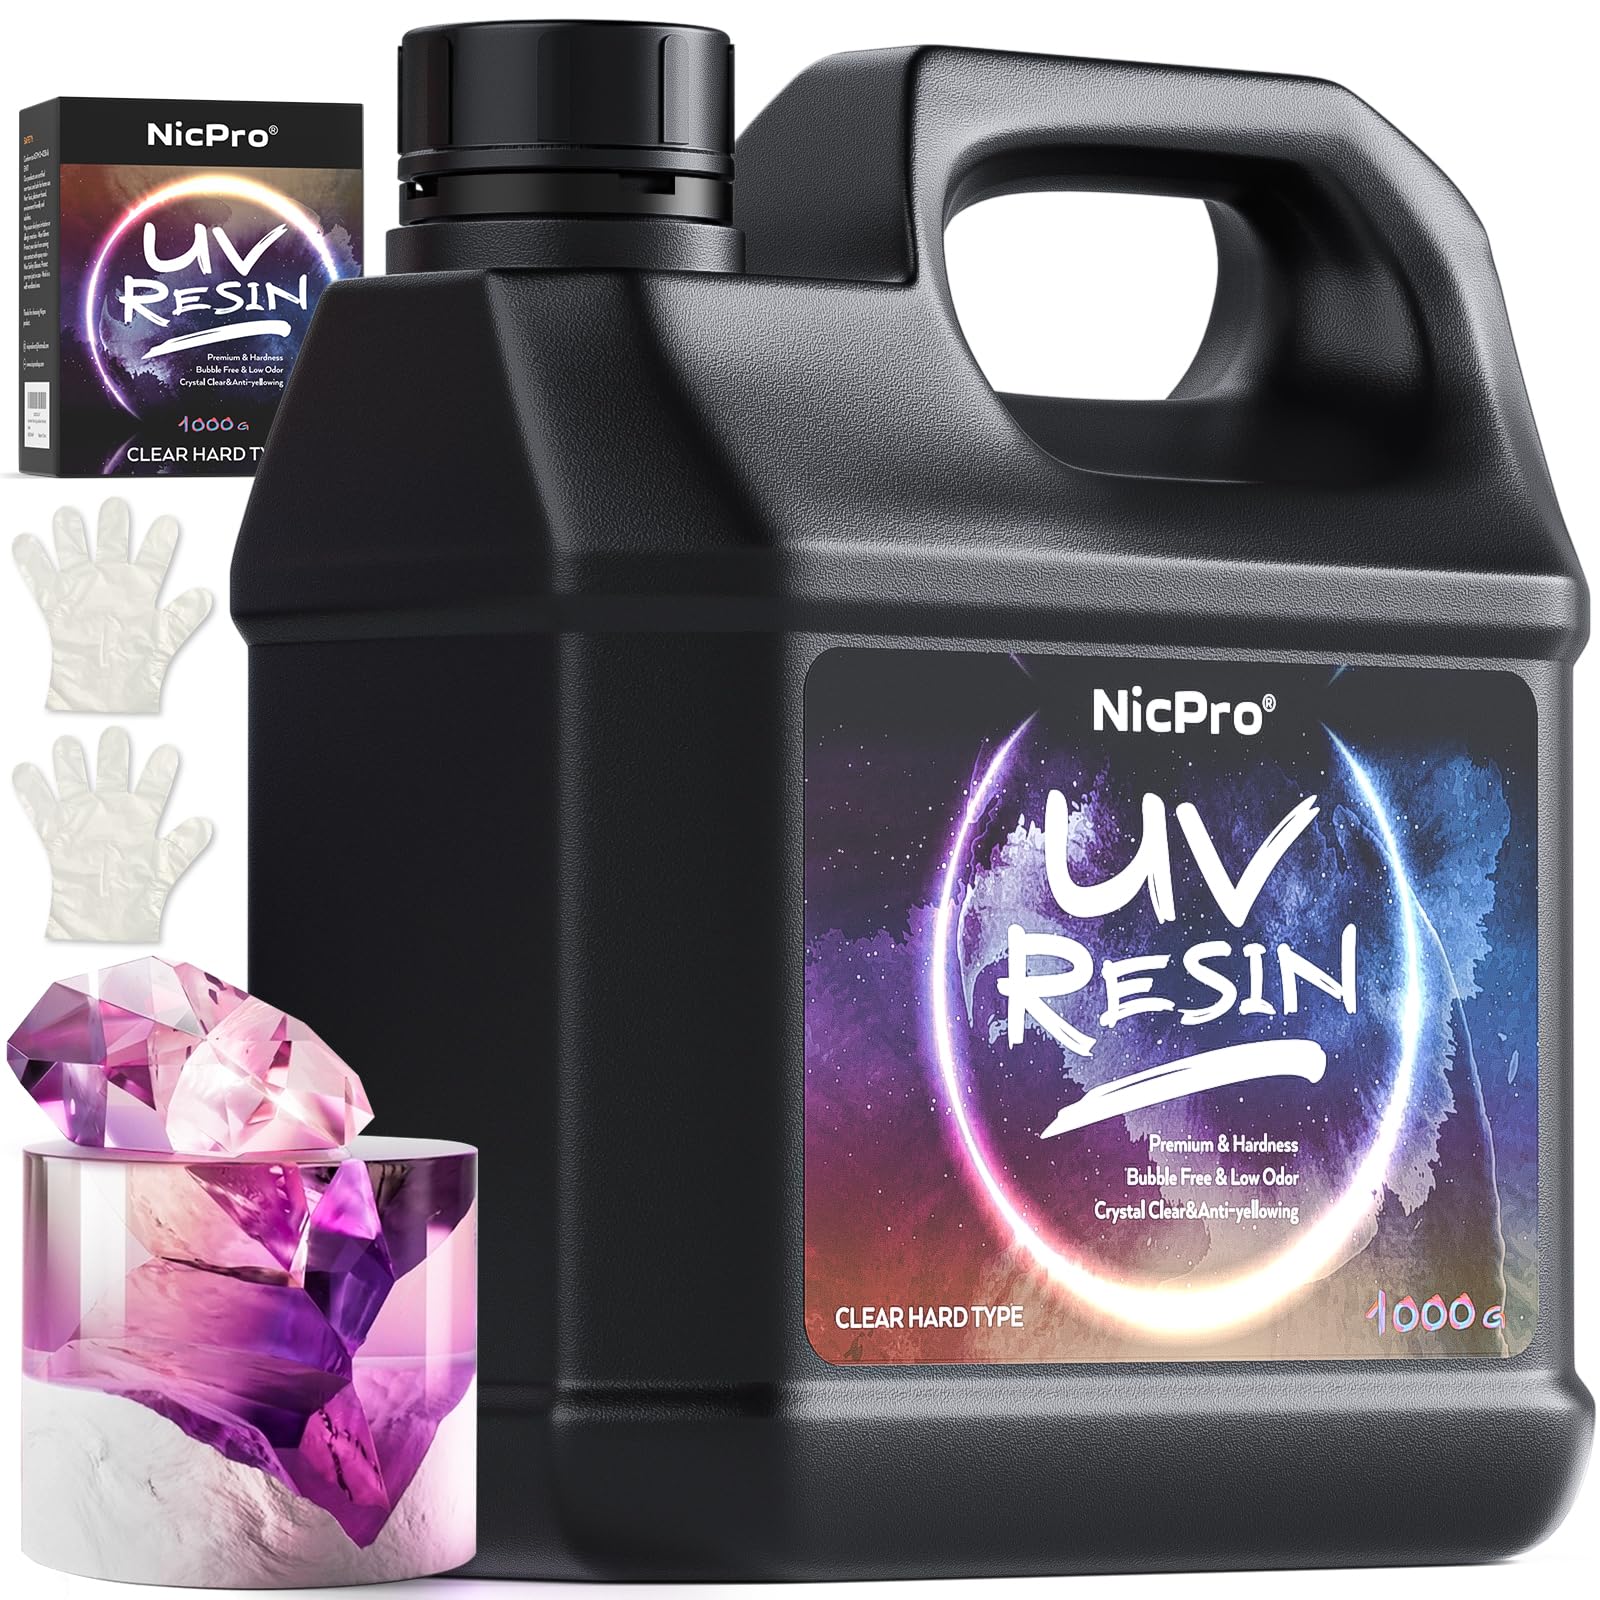 UV Resin 1,000g - Crystal Clear Improved Ultraviolet Curing Epoxy Resin for  DIY Jewelry Making, Craft Decoration - Hard UV Glue Solar Cure Sunlight